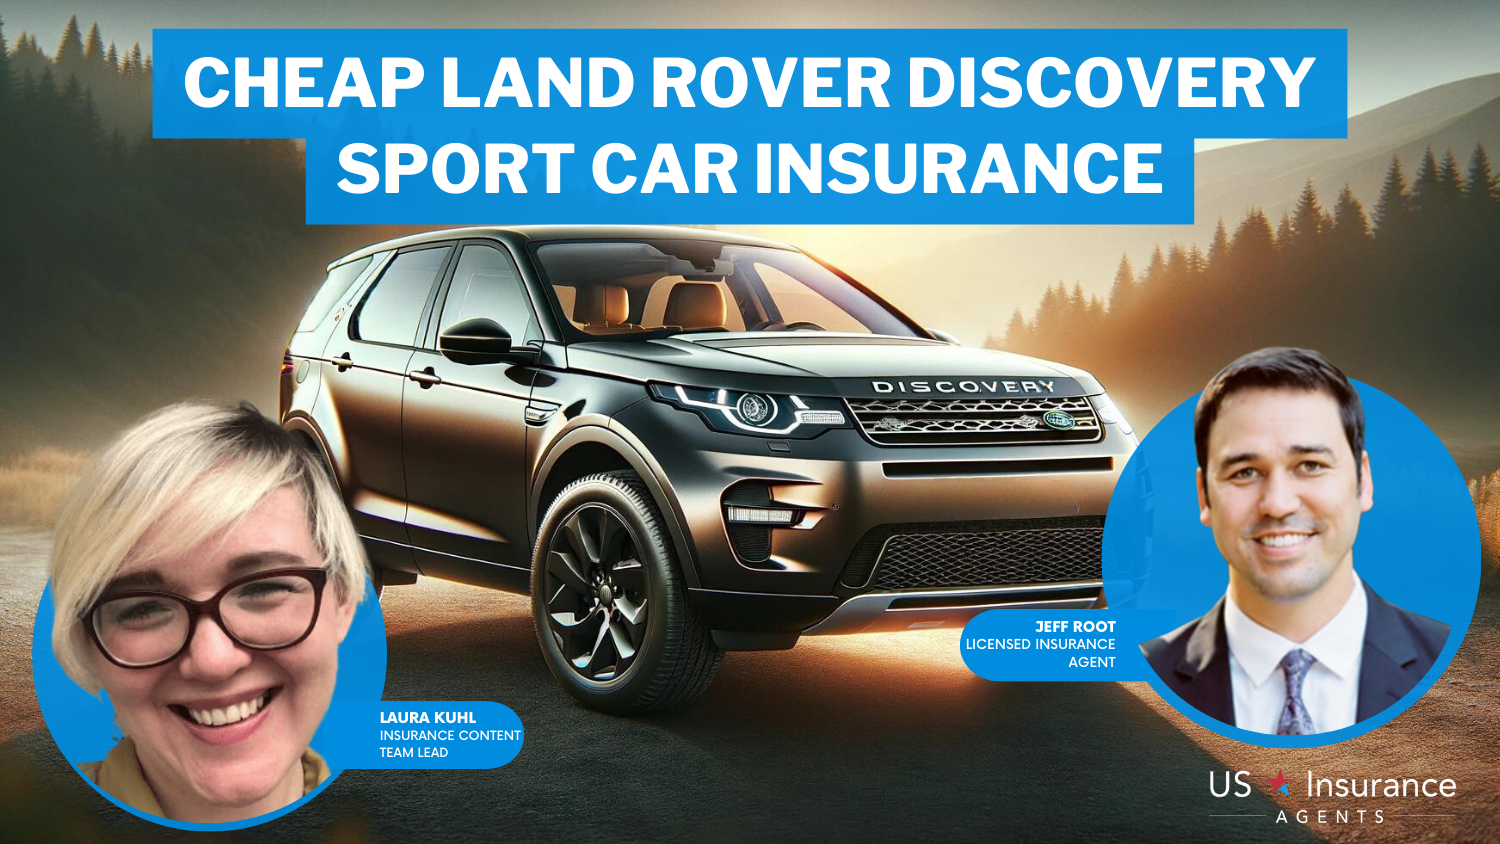 Cheap Land Rover Discovery Sport Car Insurance: Safeco, USAA, and AAA